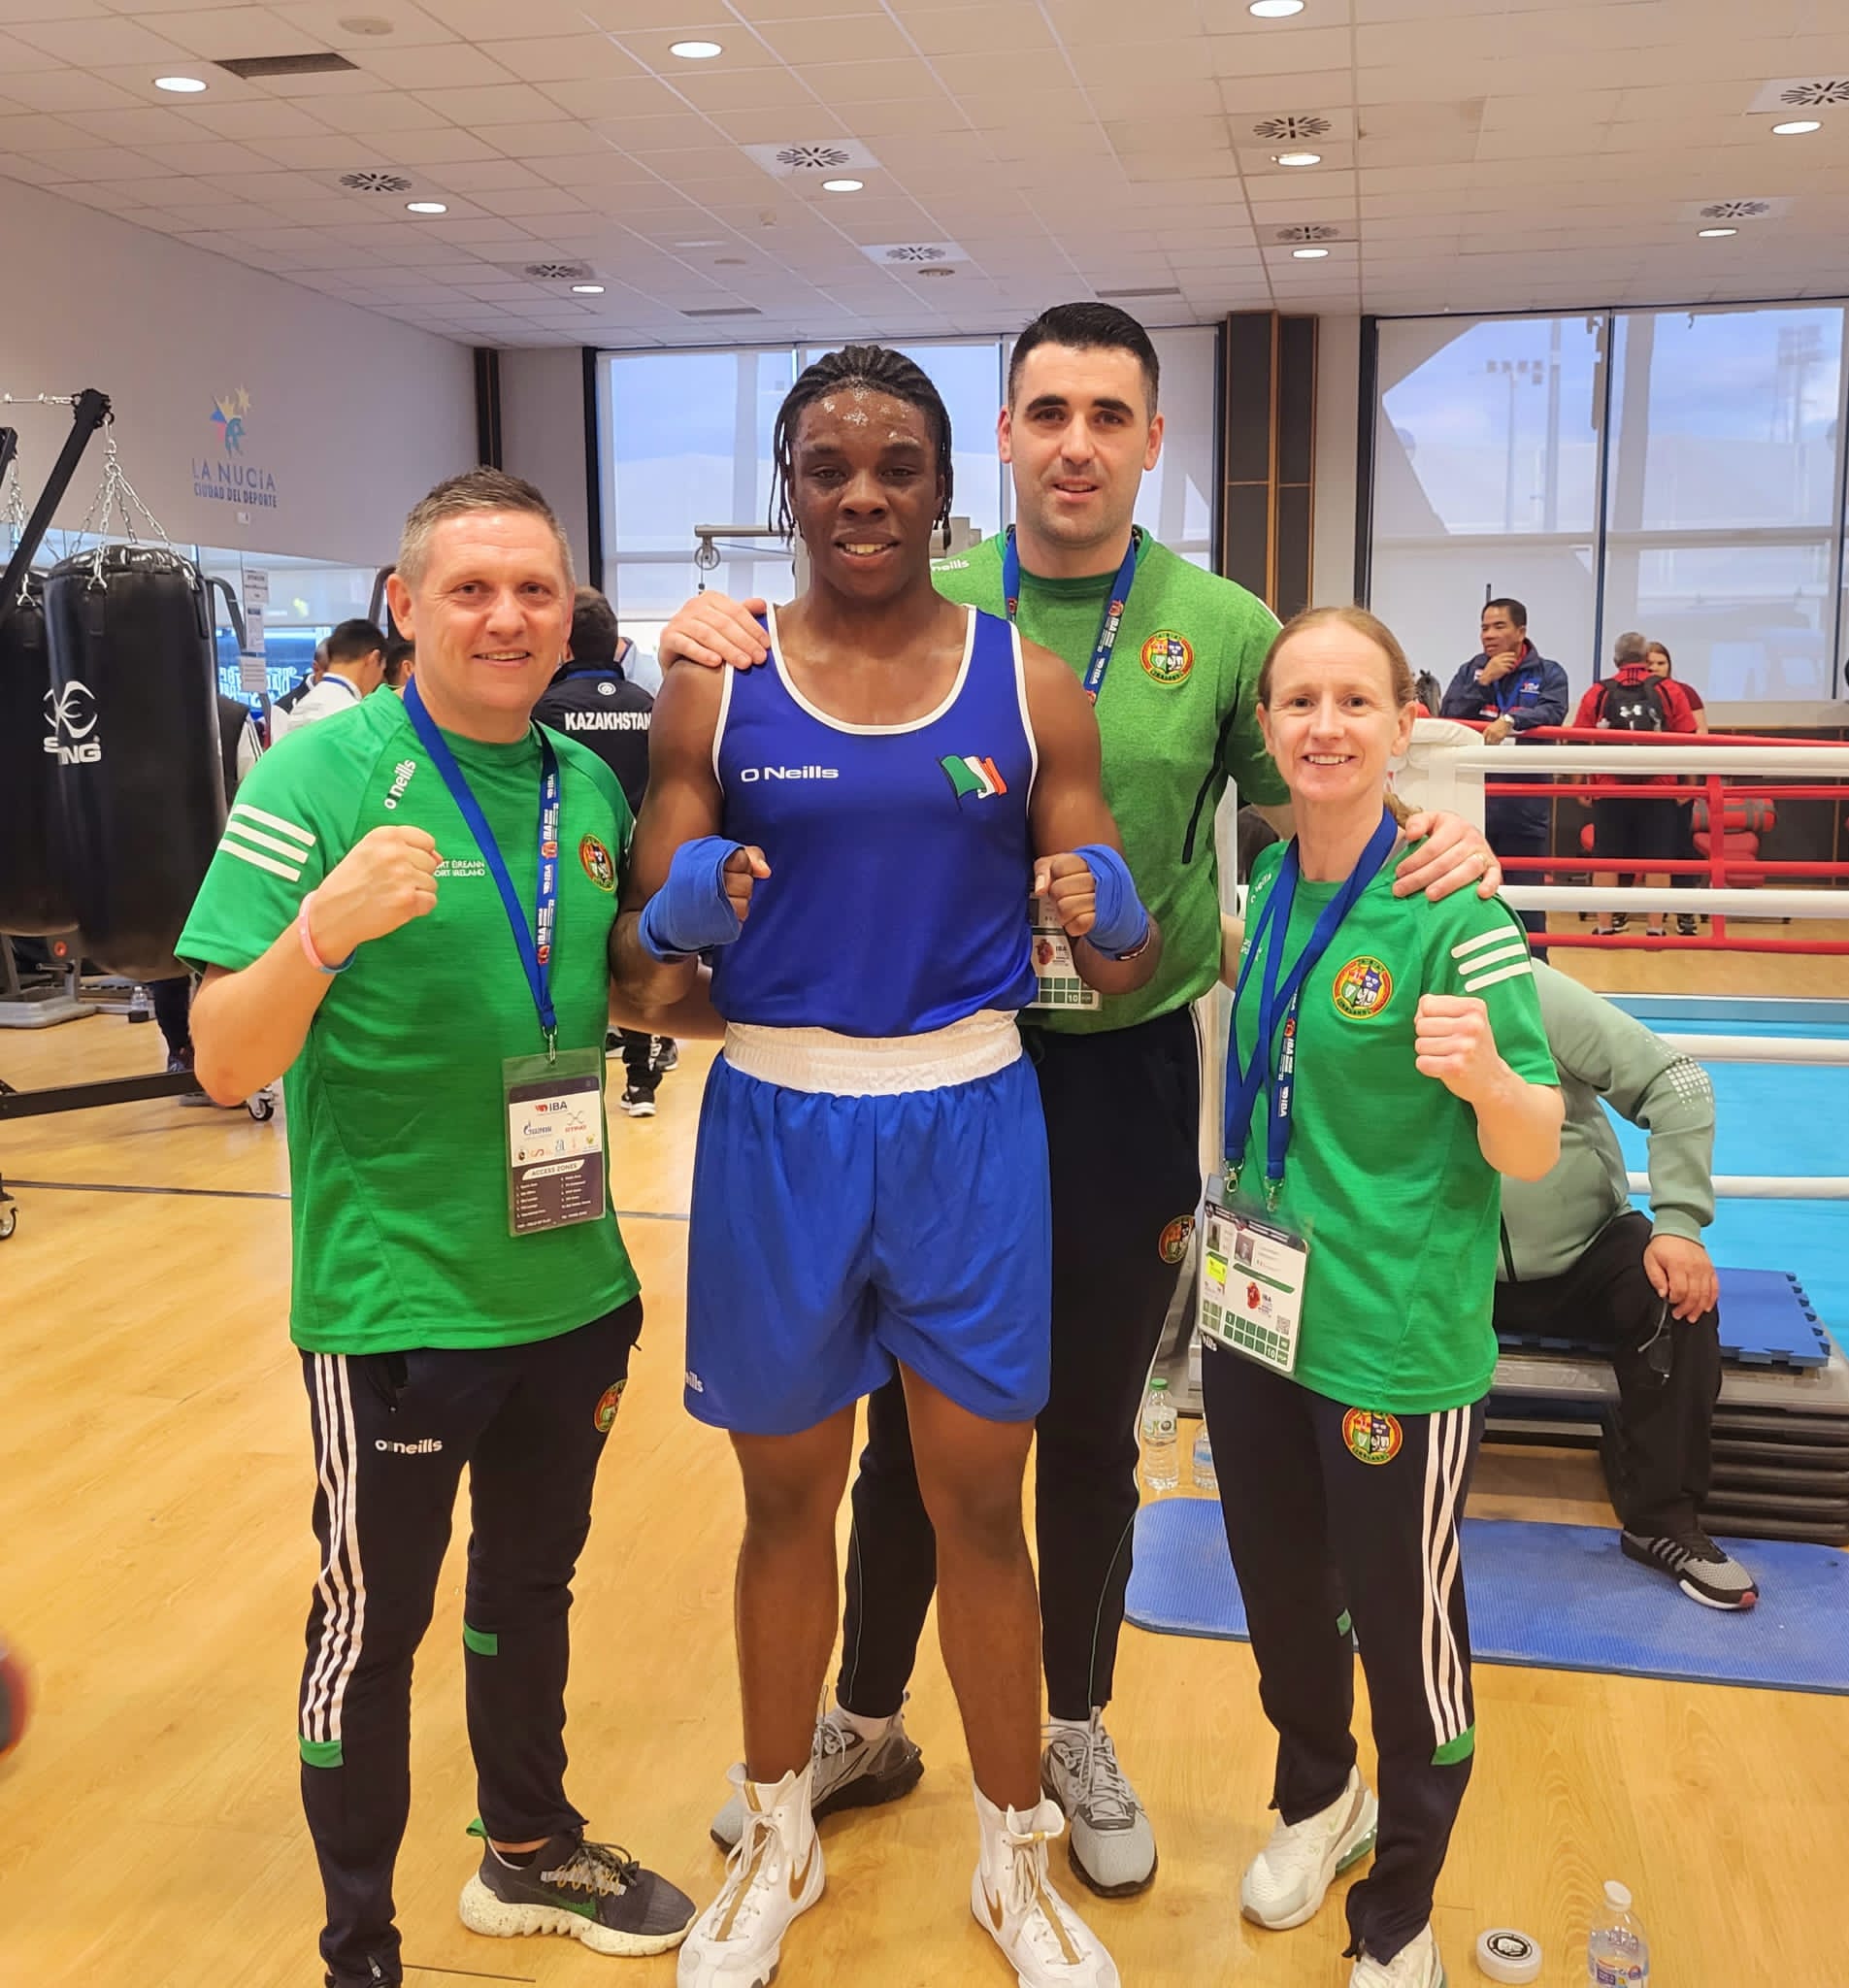 Team Ireland claim 4 World Youth Championship medals on the 1st day of